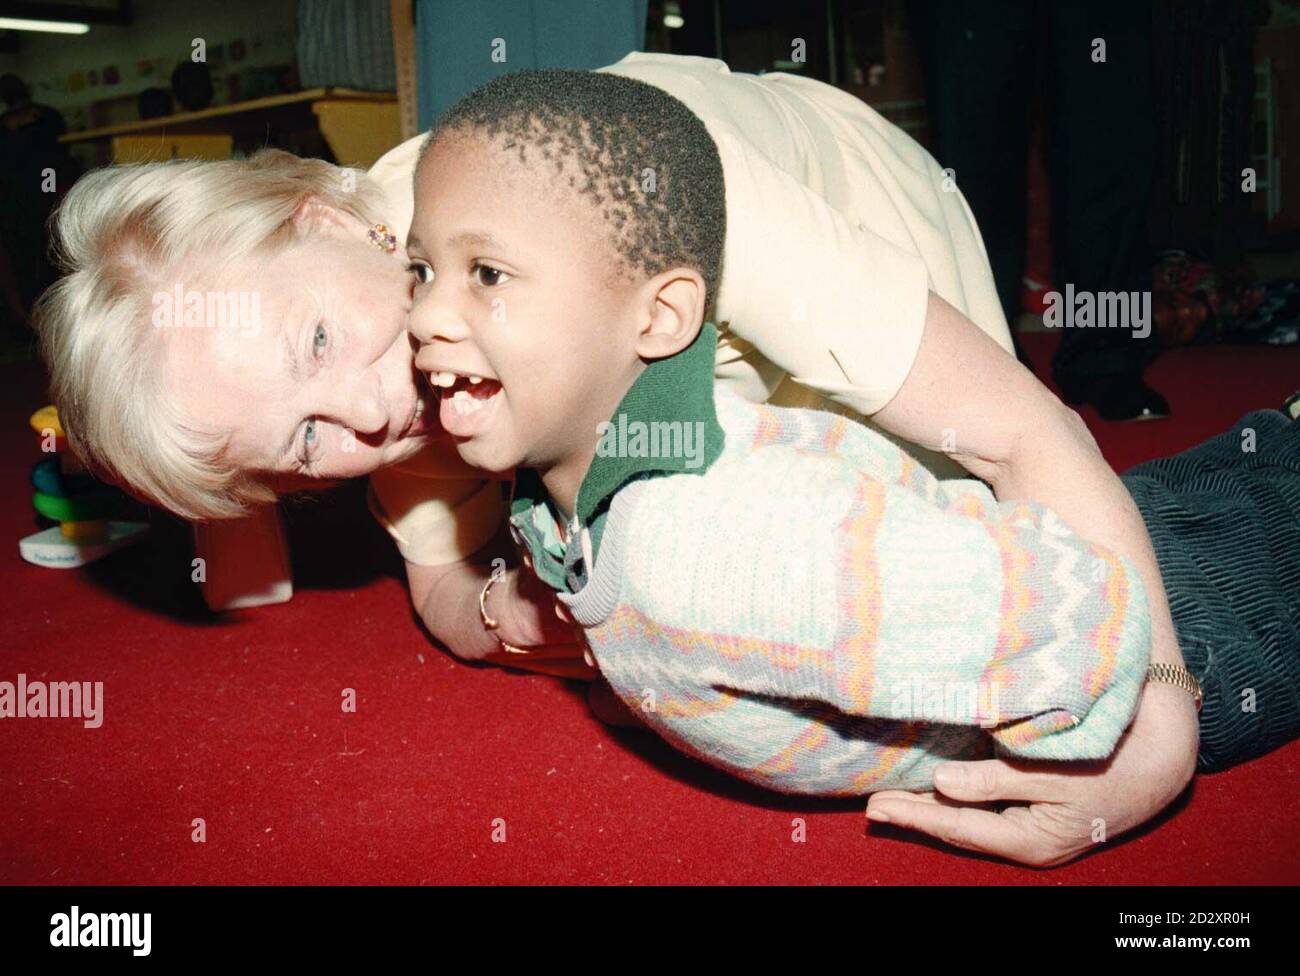 HRH The Duchess of Kent cradles a child with Cerebral Palsey at The Philani Nutrition and Rehabilitation Centre in Cape Town South Africa during her six day visit in her role as Patron of the UK Committee for UNICEF. Picture by Stefan Rousseau Stock Photo